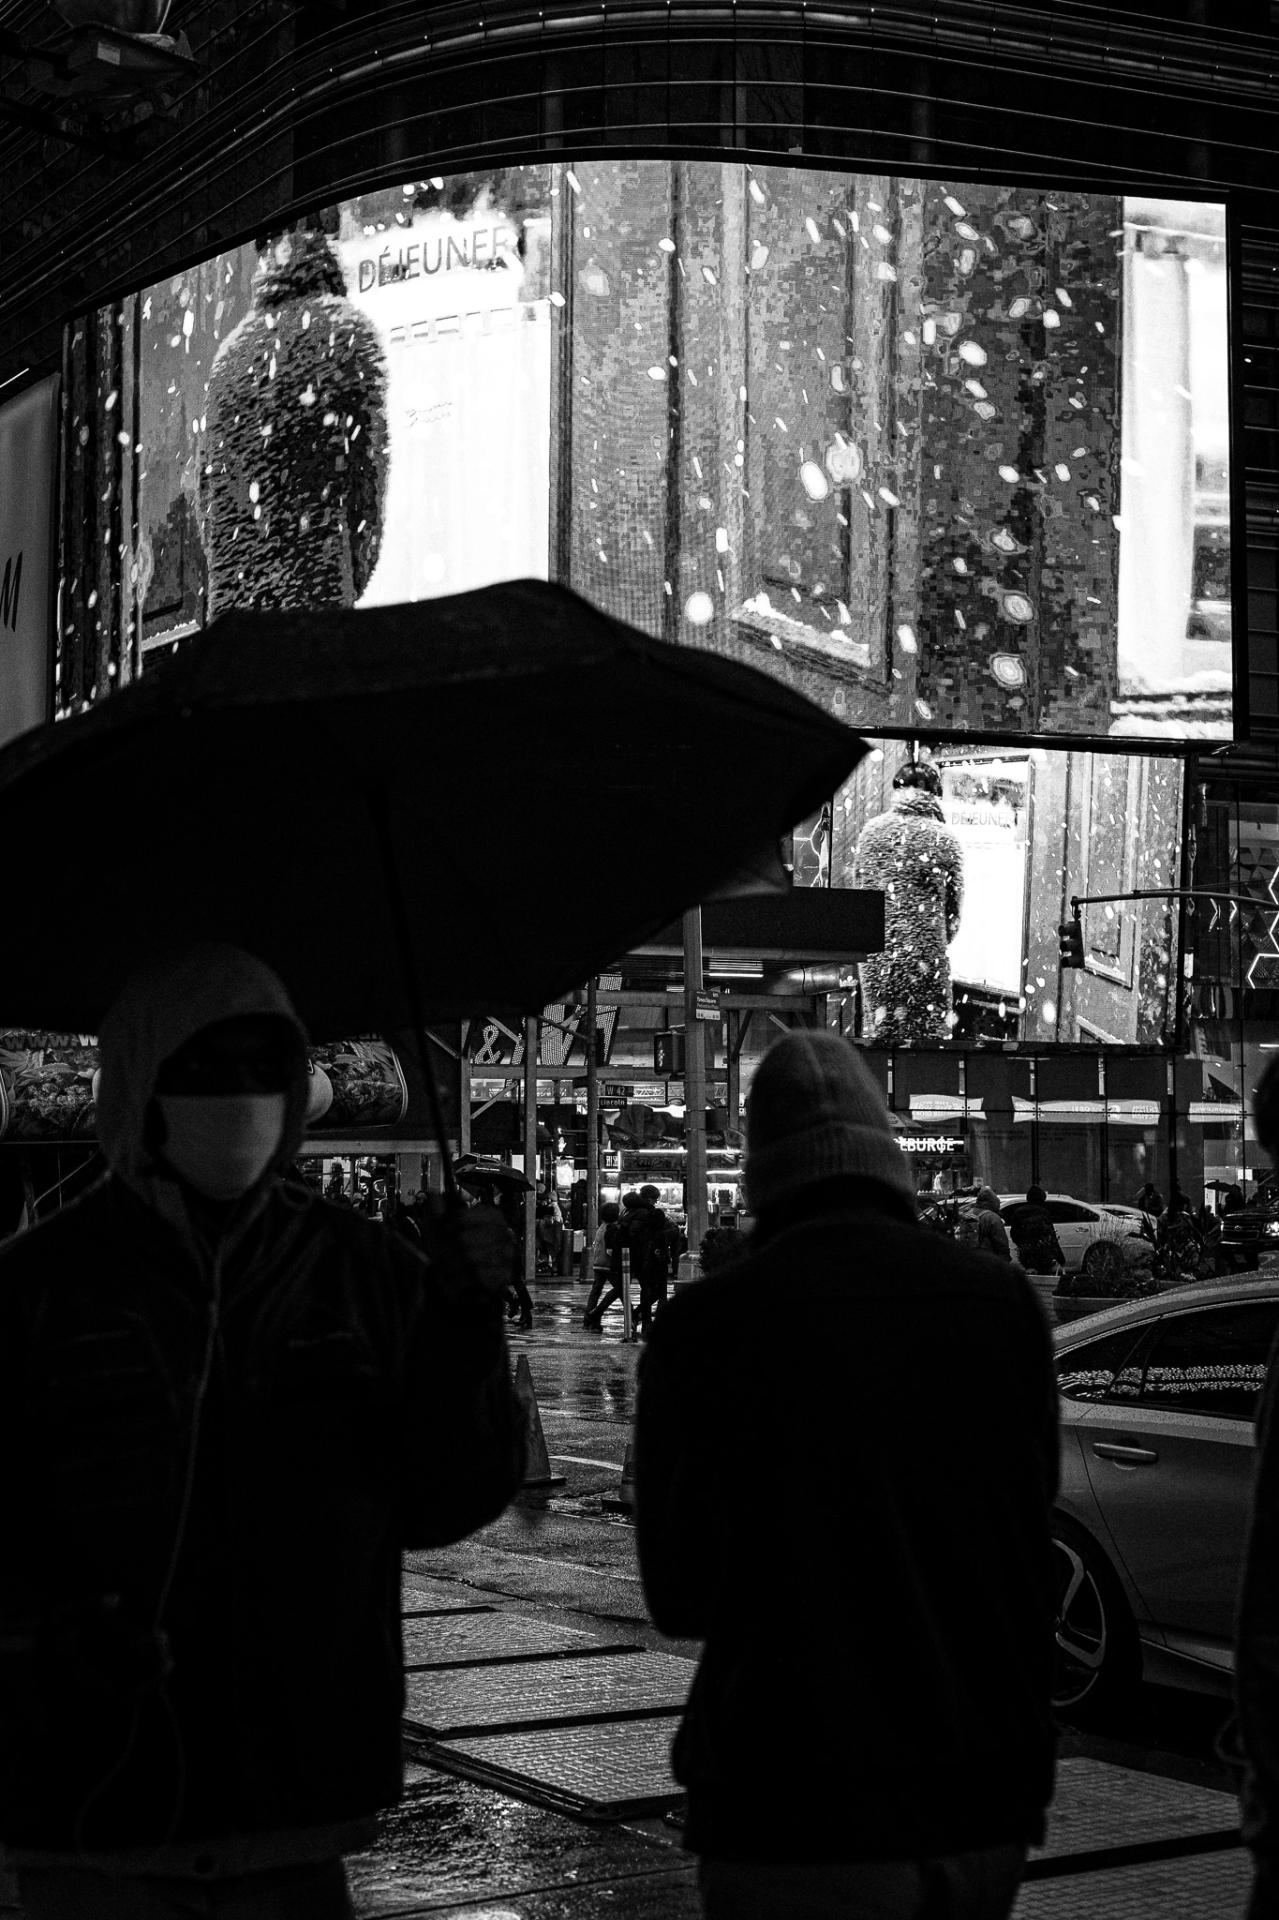 New York Photography Awards Winner - Incomplete Stories